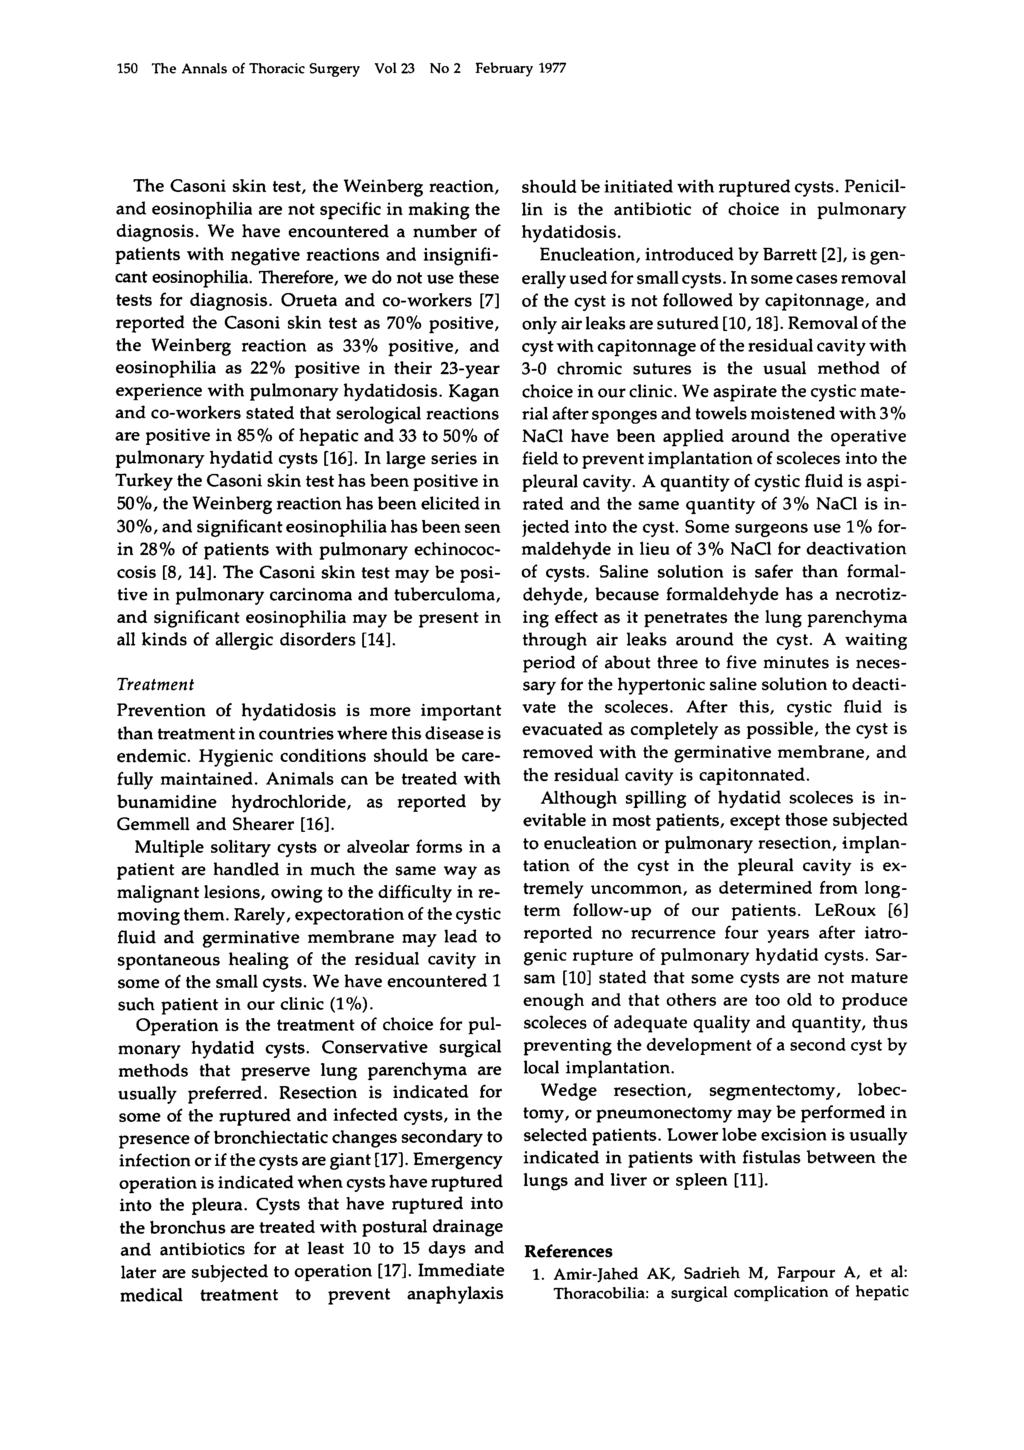 150 The Annals of Thoracic Surgery Vol23 No 2 February 1977 The Casoni skin test, the Weinberg reaction, and eosinophilia are not specific in making the diagnosis.